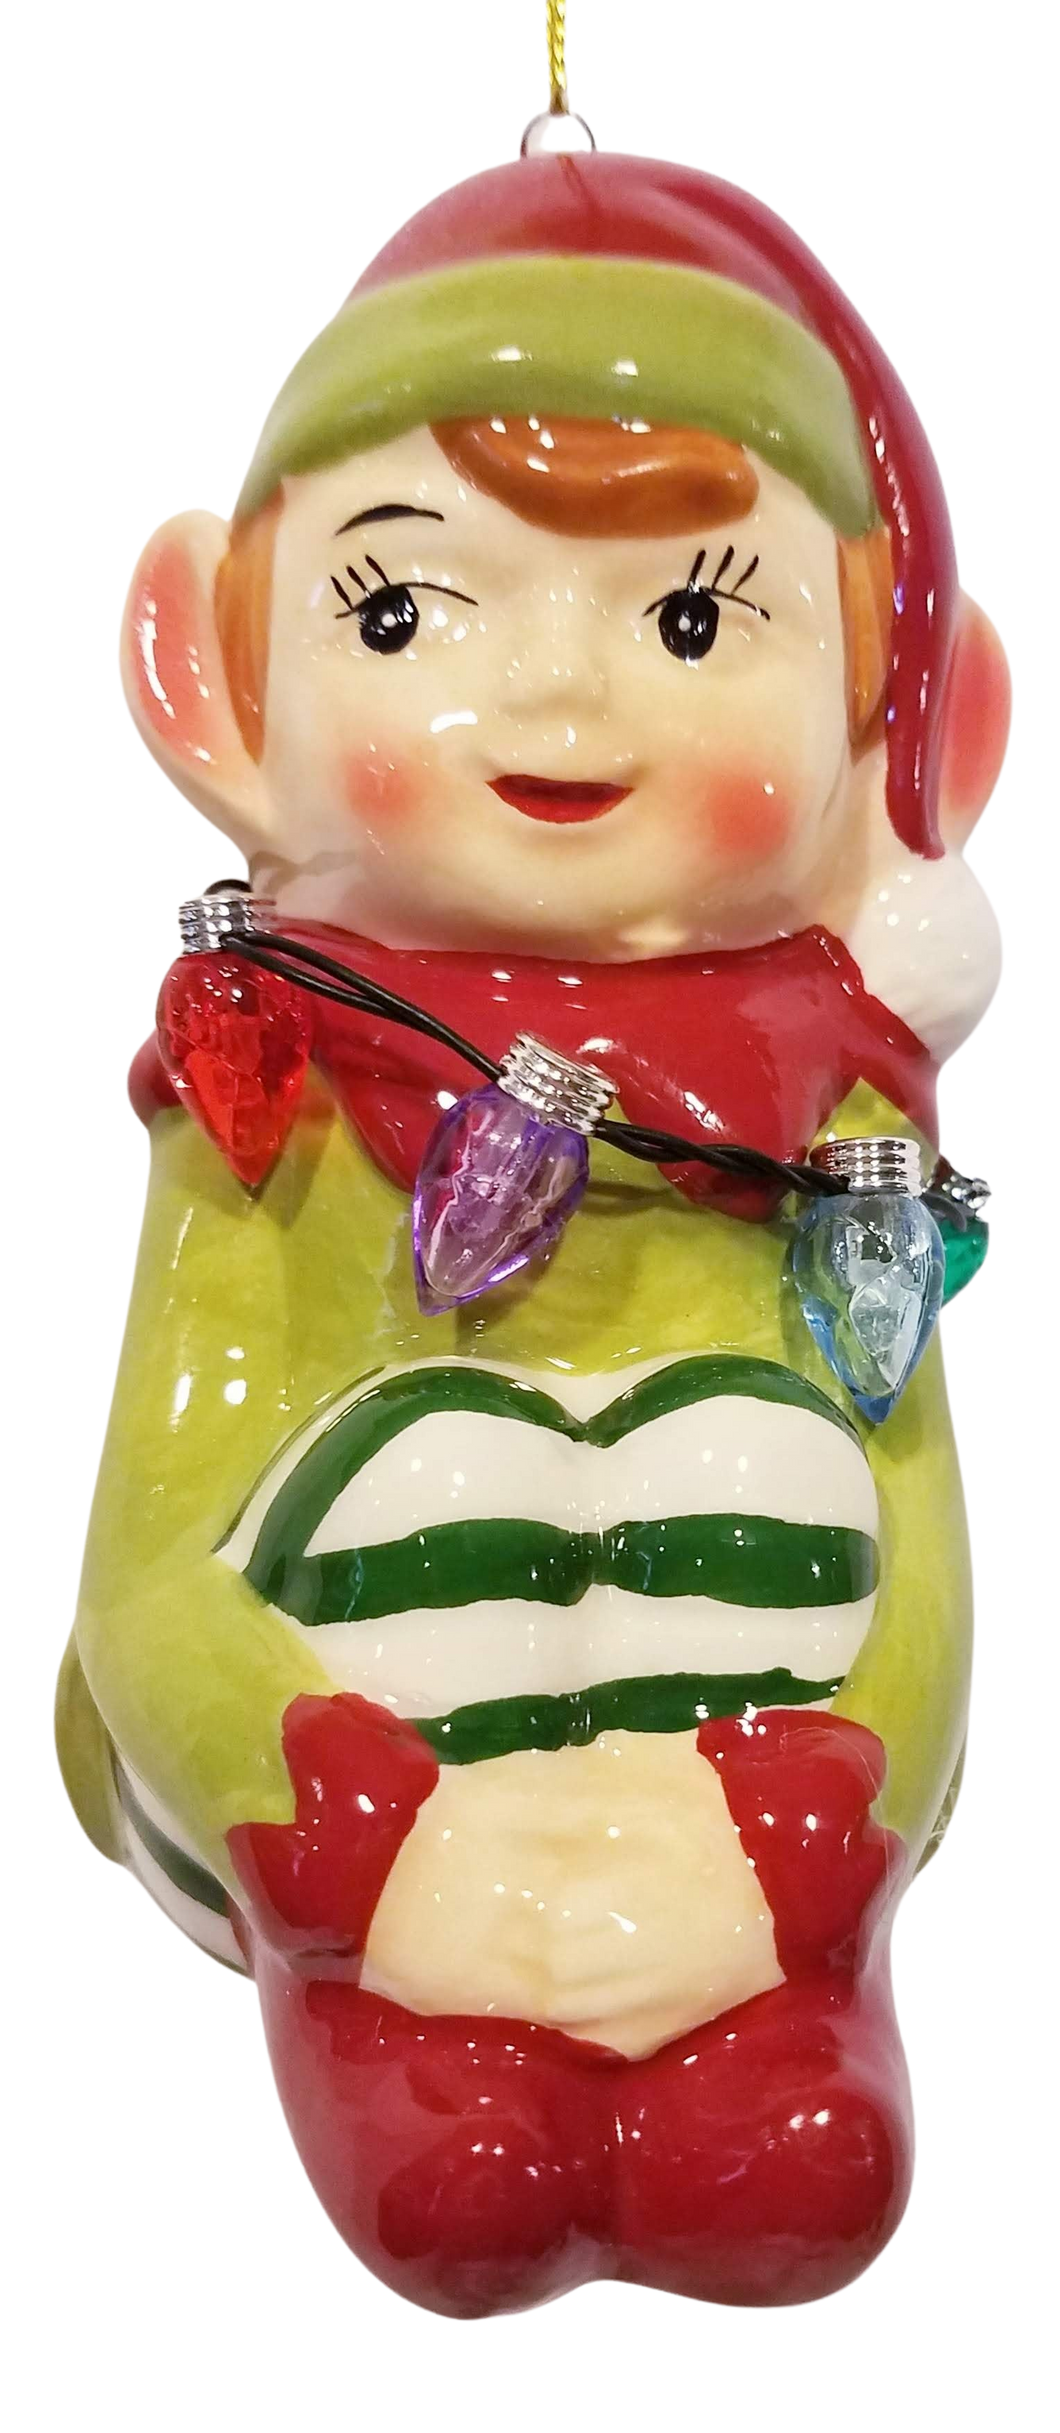 Ceramic Green/Red Elf with Christmas Lights